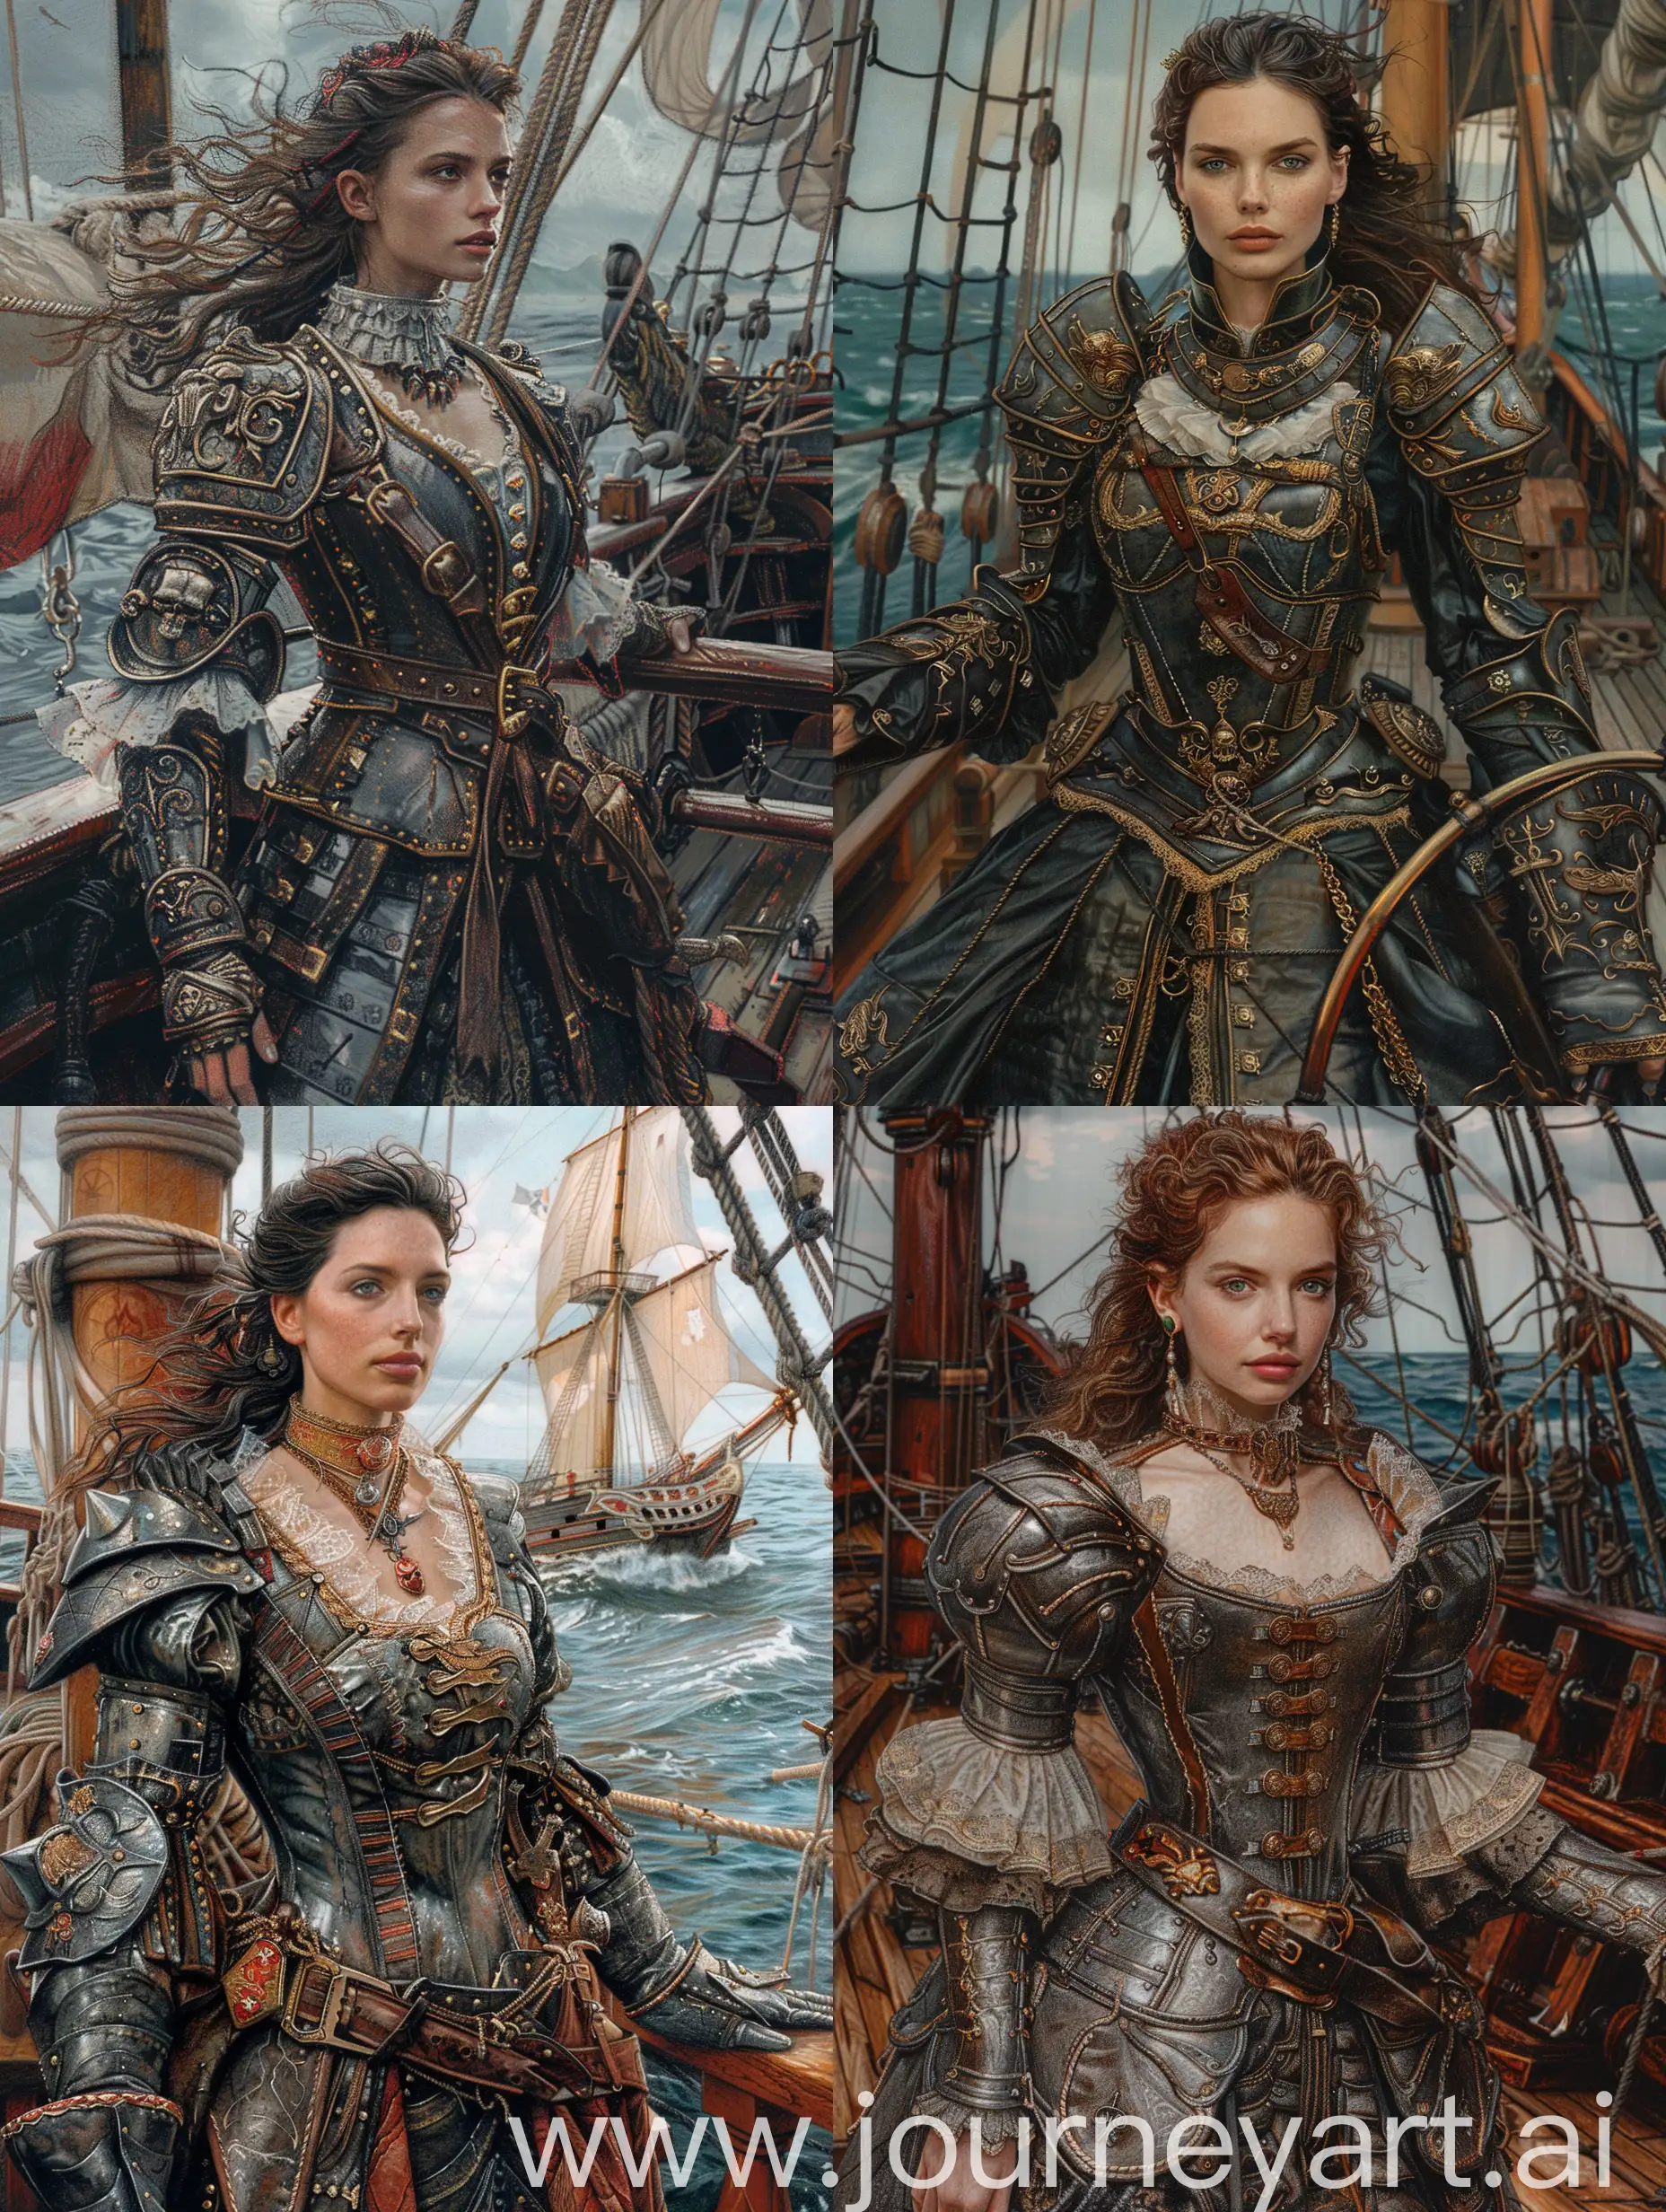 Pirate-Queen-on-Sailing-Frigate-Fantasy-RPG-Art-in-Keith-Parkinson-Style